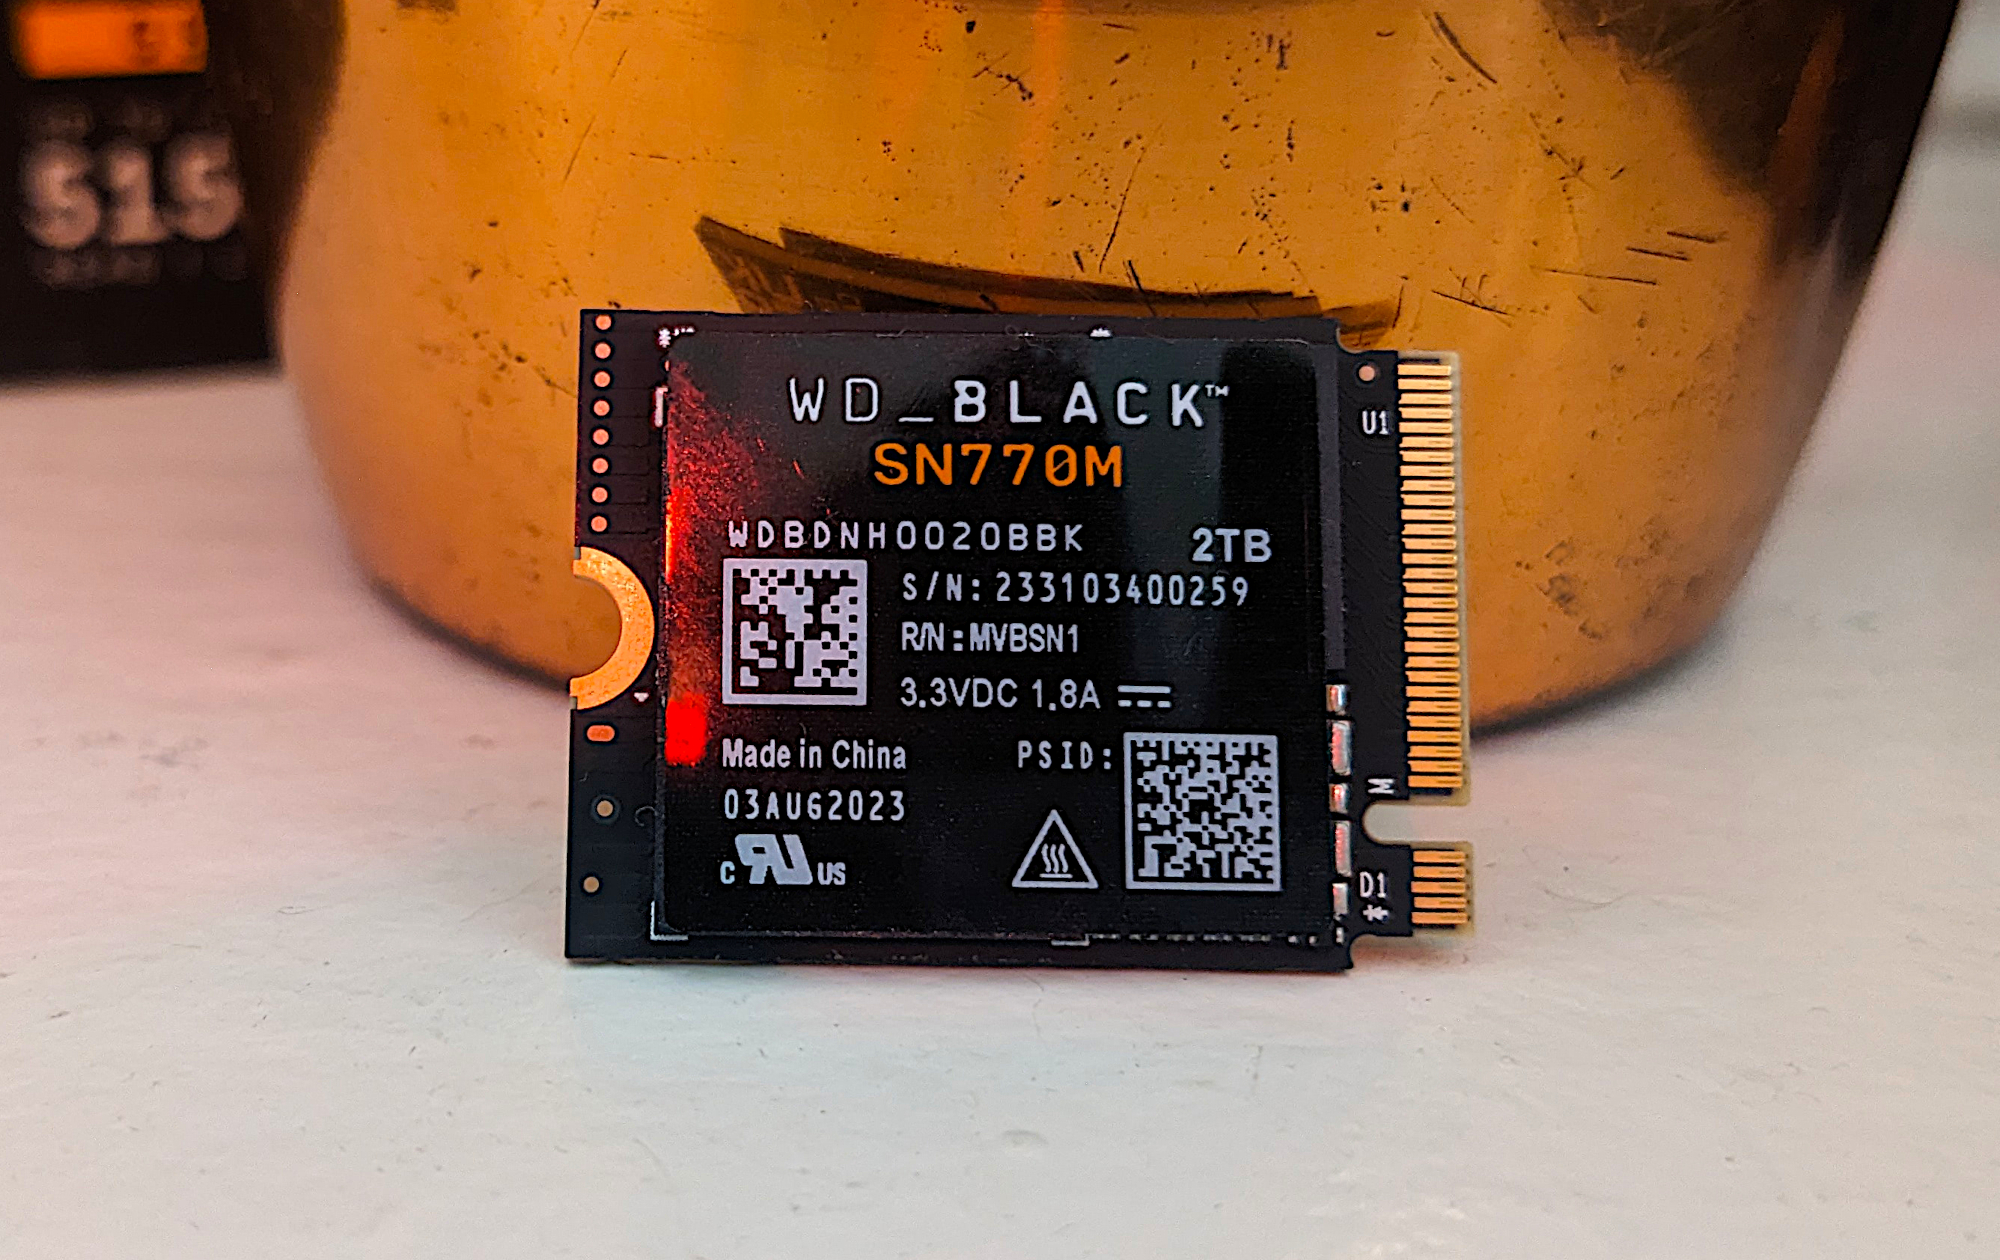 WD Black SN770M - Best PCIe 4.0 SSD for Steam Deck